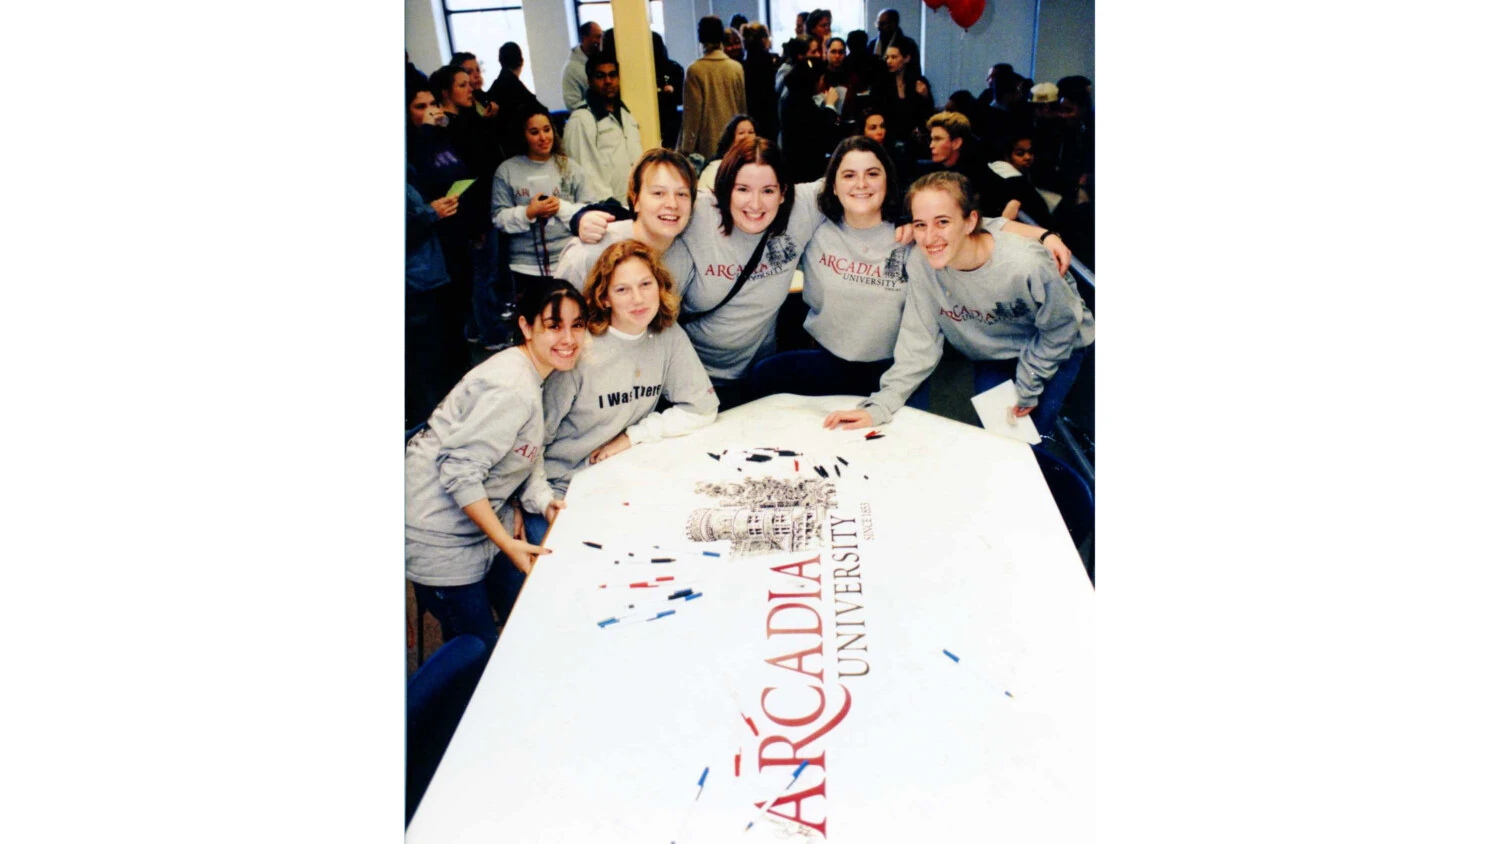 Students work on banner celebrating the name change from Beaver College to Aracadia University